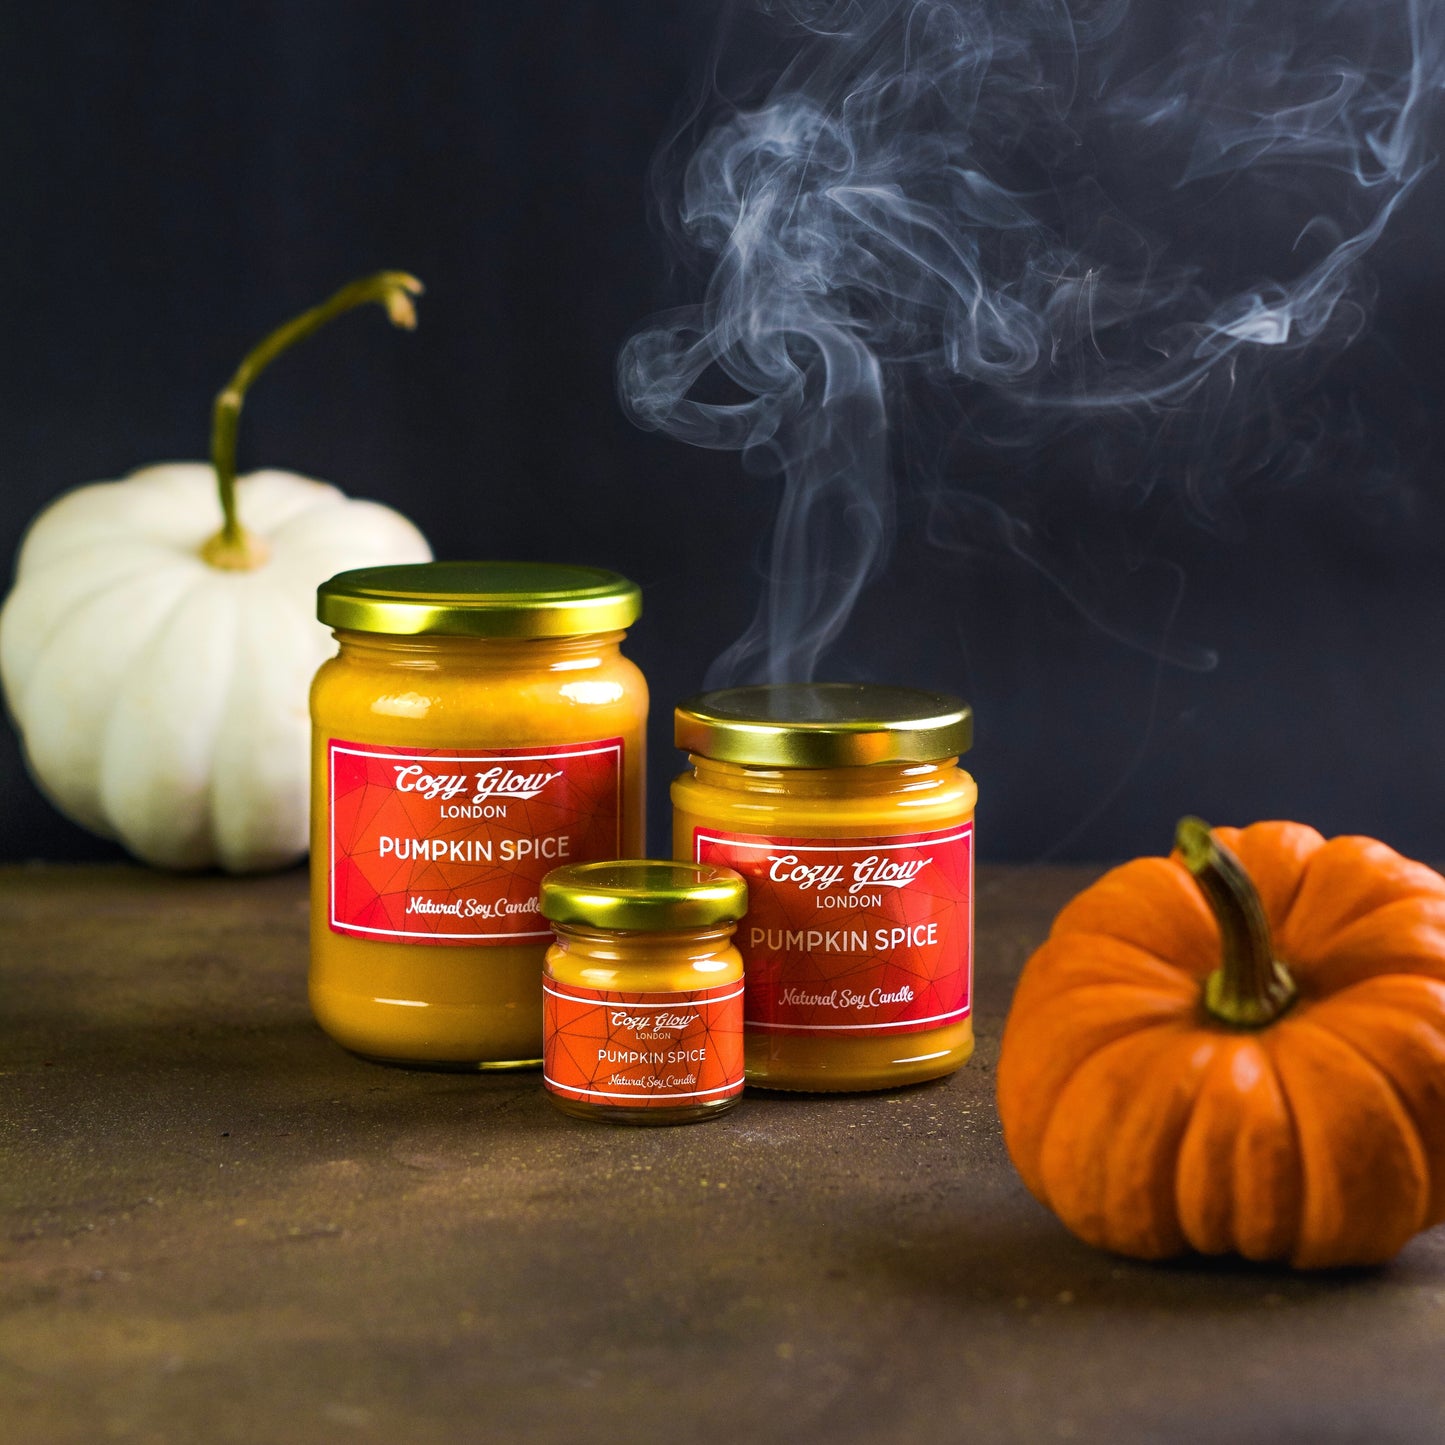 Our three sizes of Pumpkin Spice candled with smoke rising in the background to create an easy spooky feeling